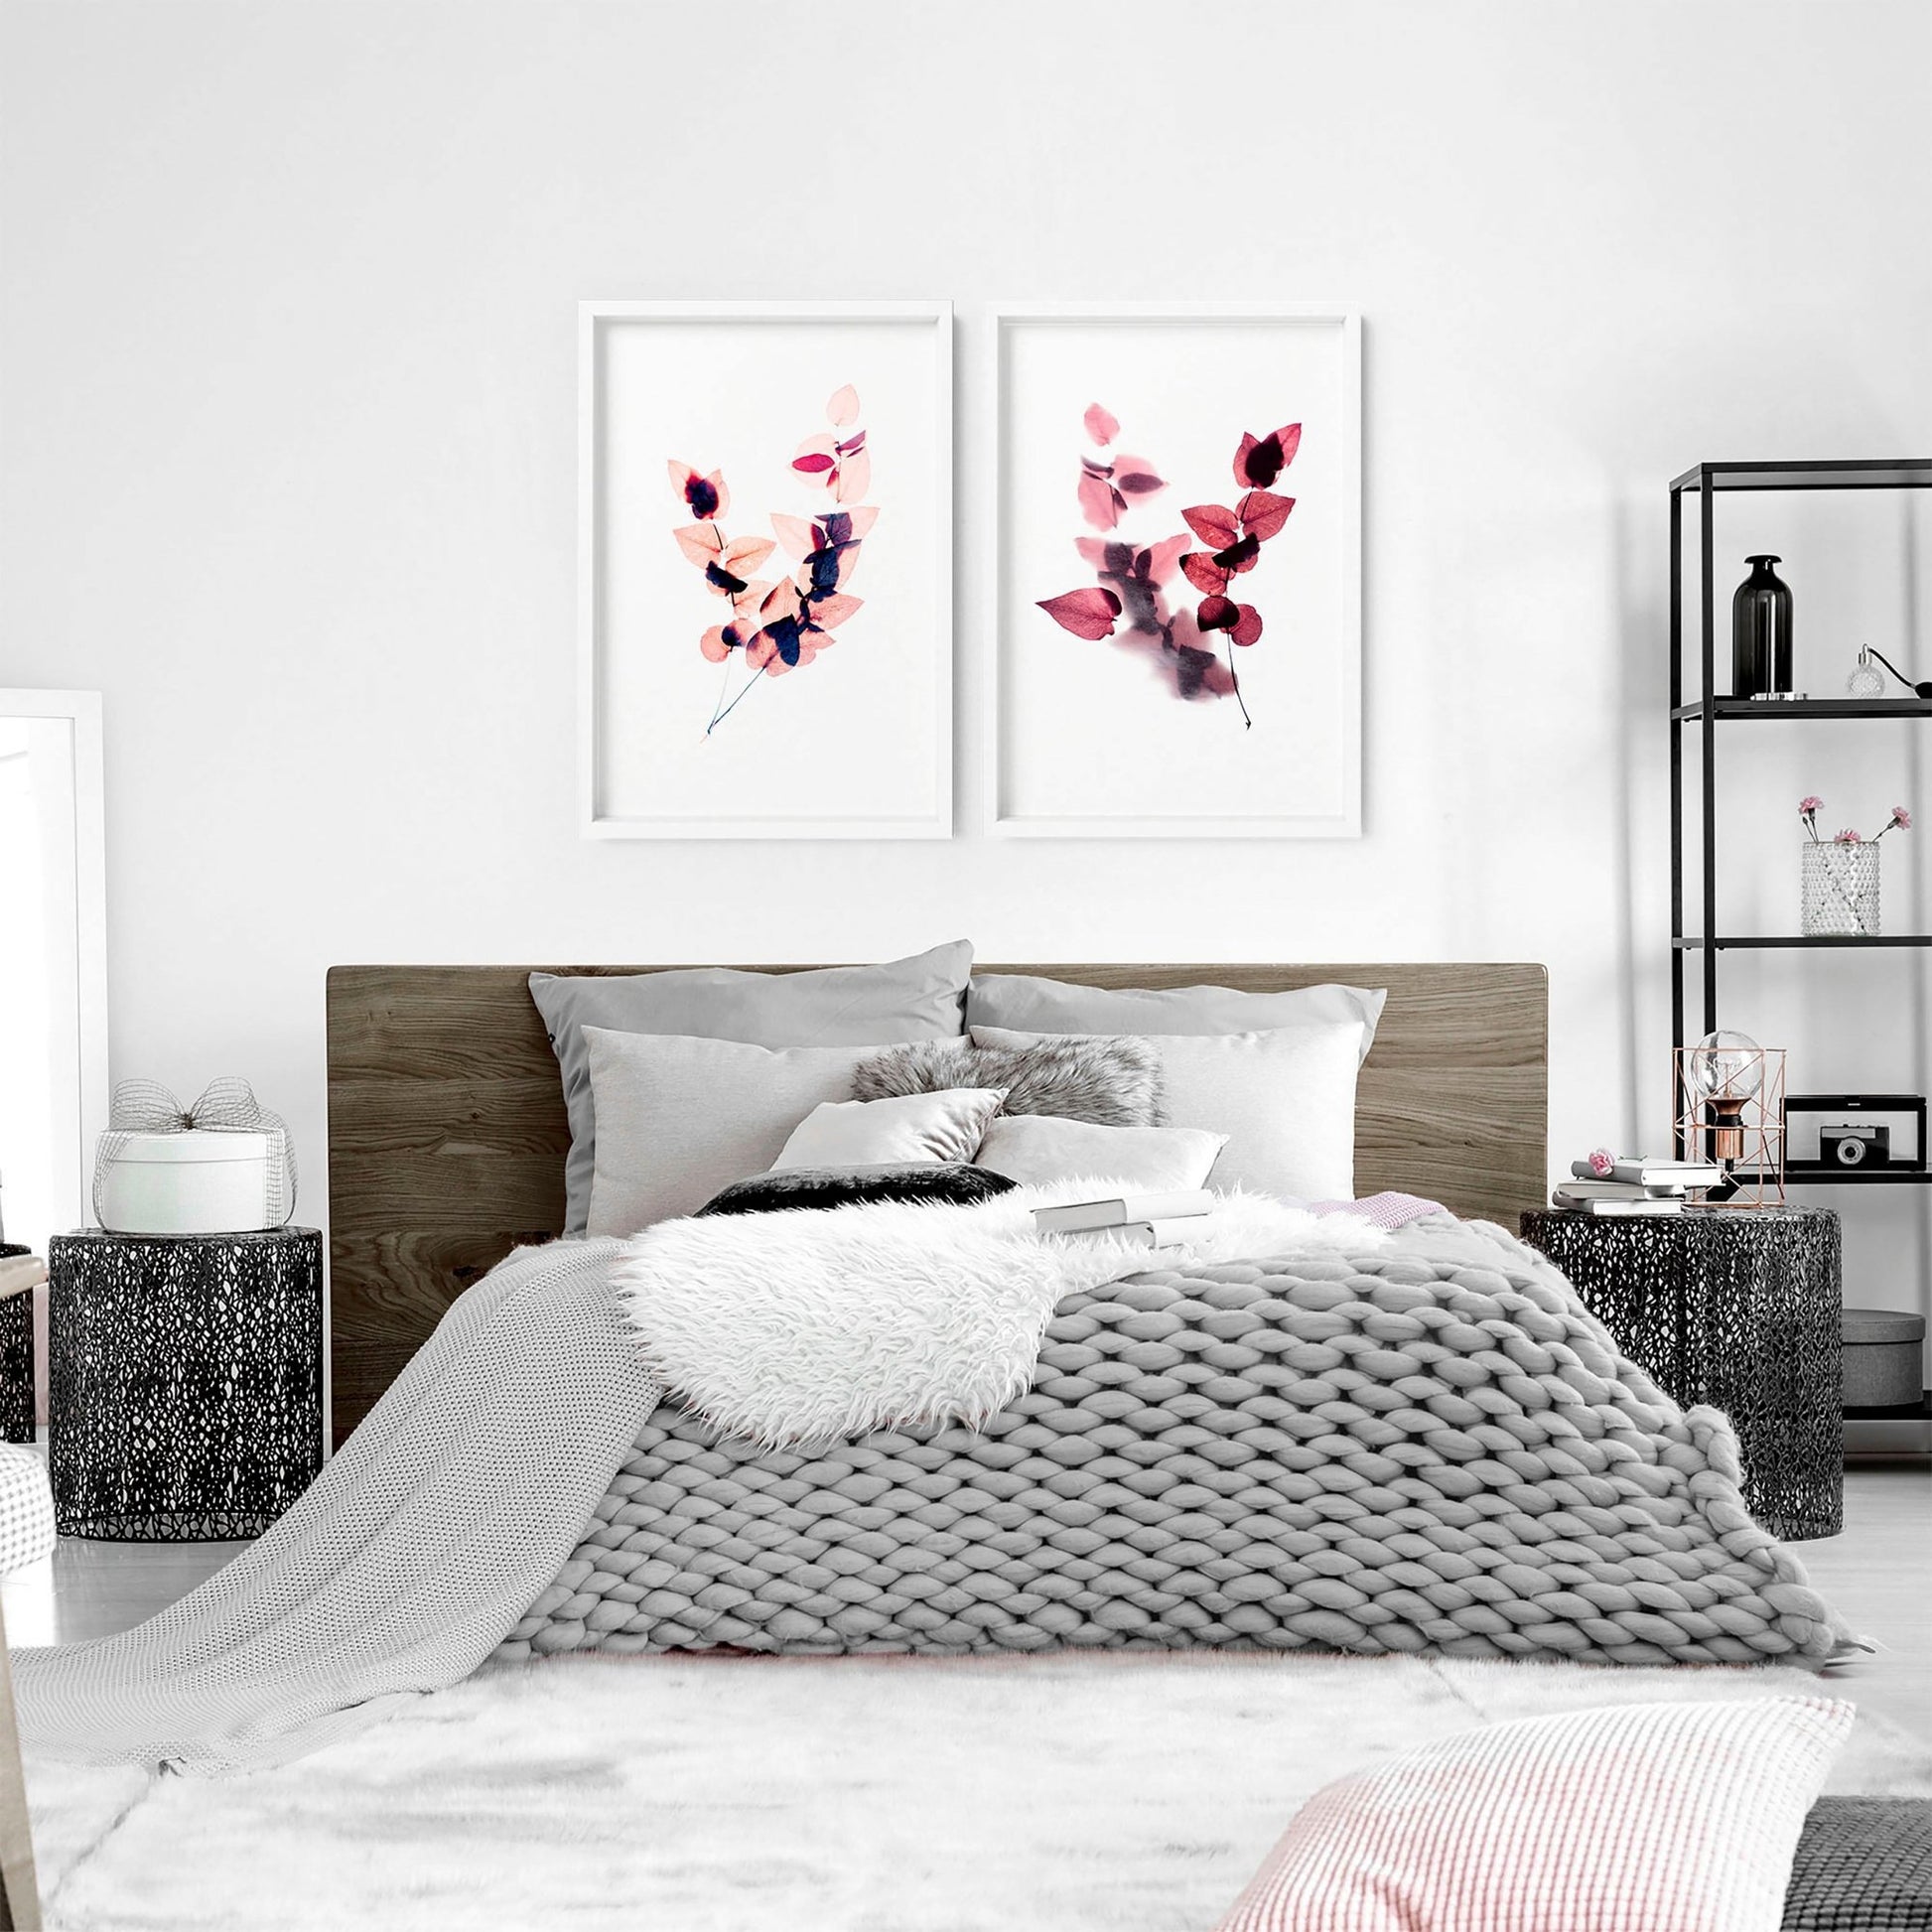 Bedroom wall art | set of 2 prints - About Wall Art